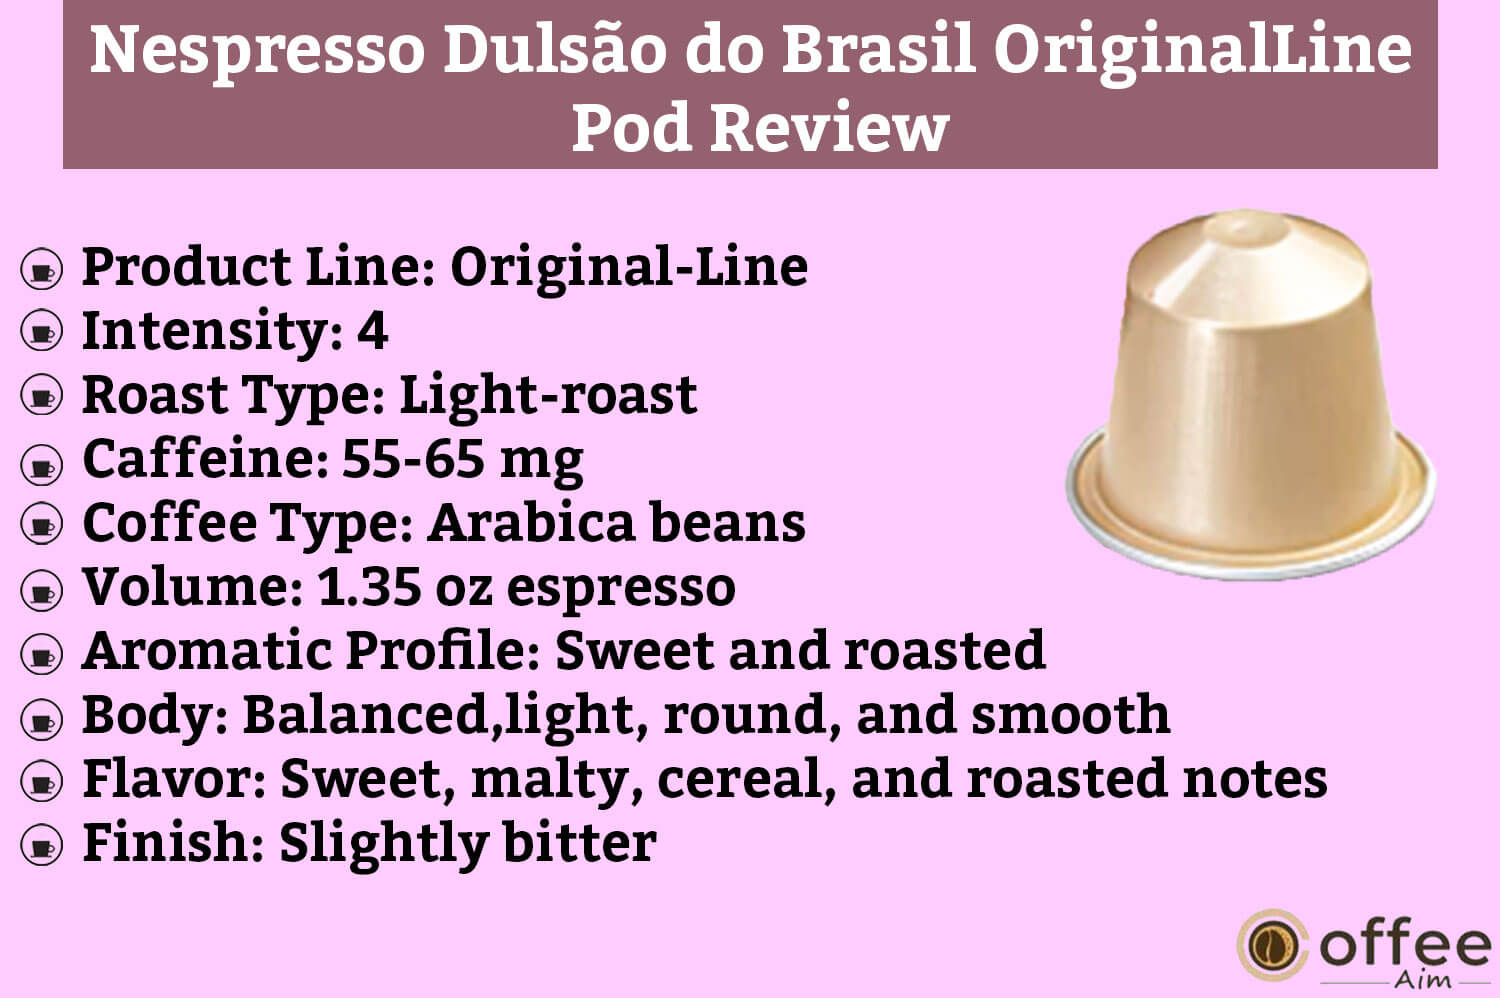 The image depicts the highlighted features of the "Nespresso Dulsão do Brasil OriginalLine Pod" for the article's showcase.




